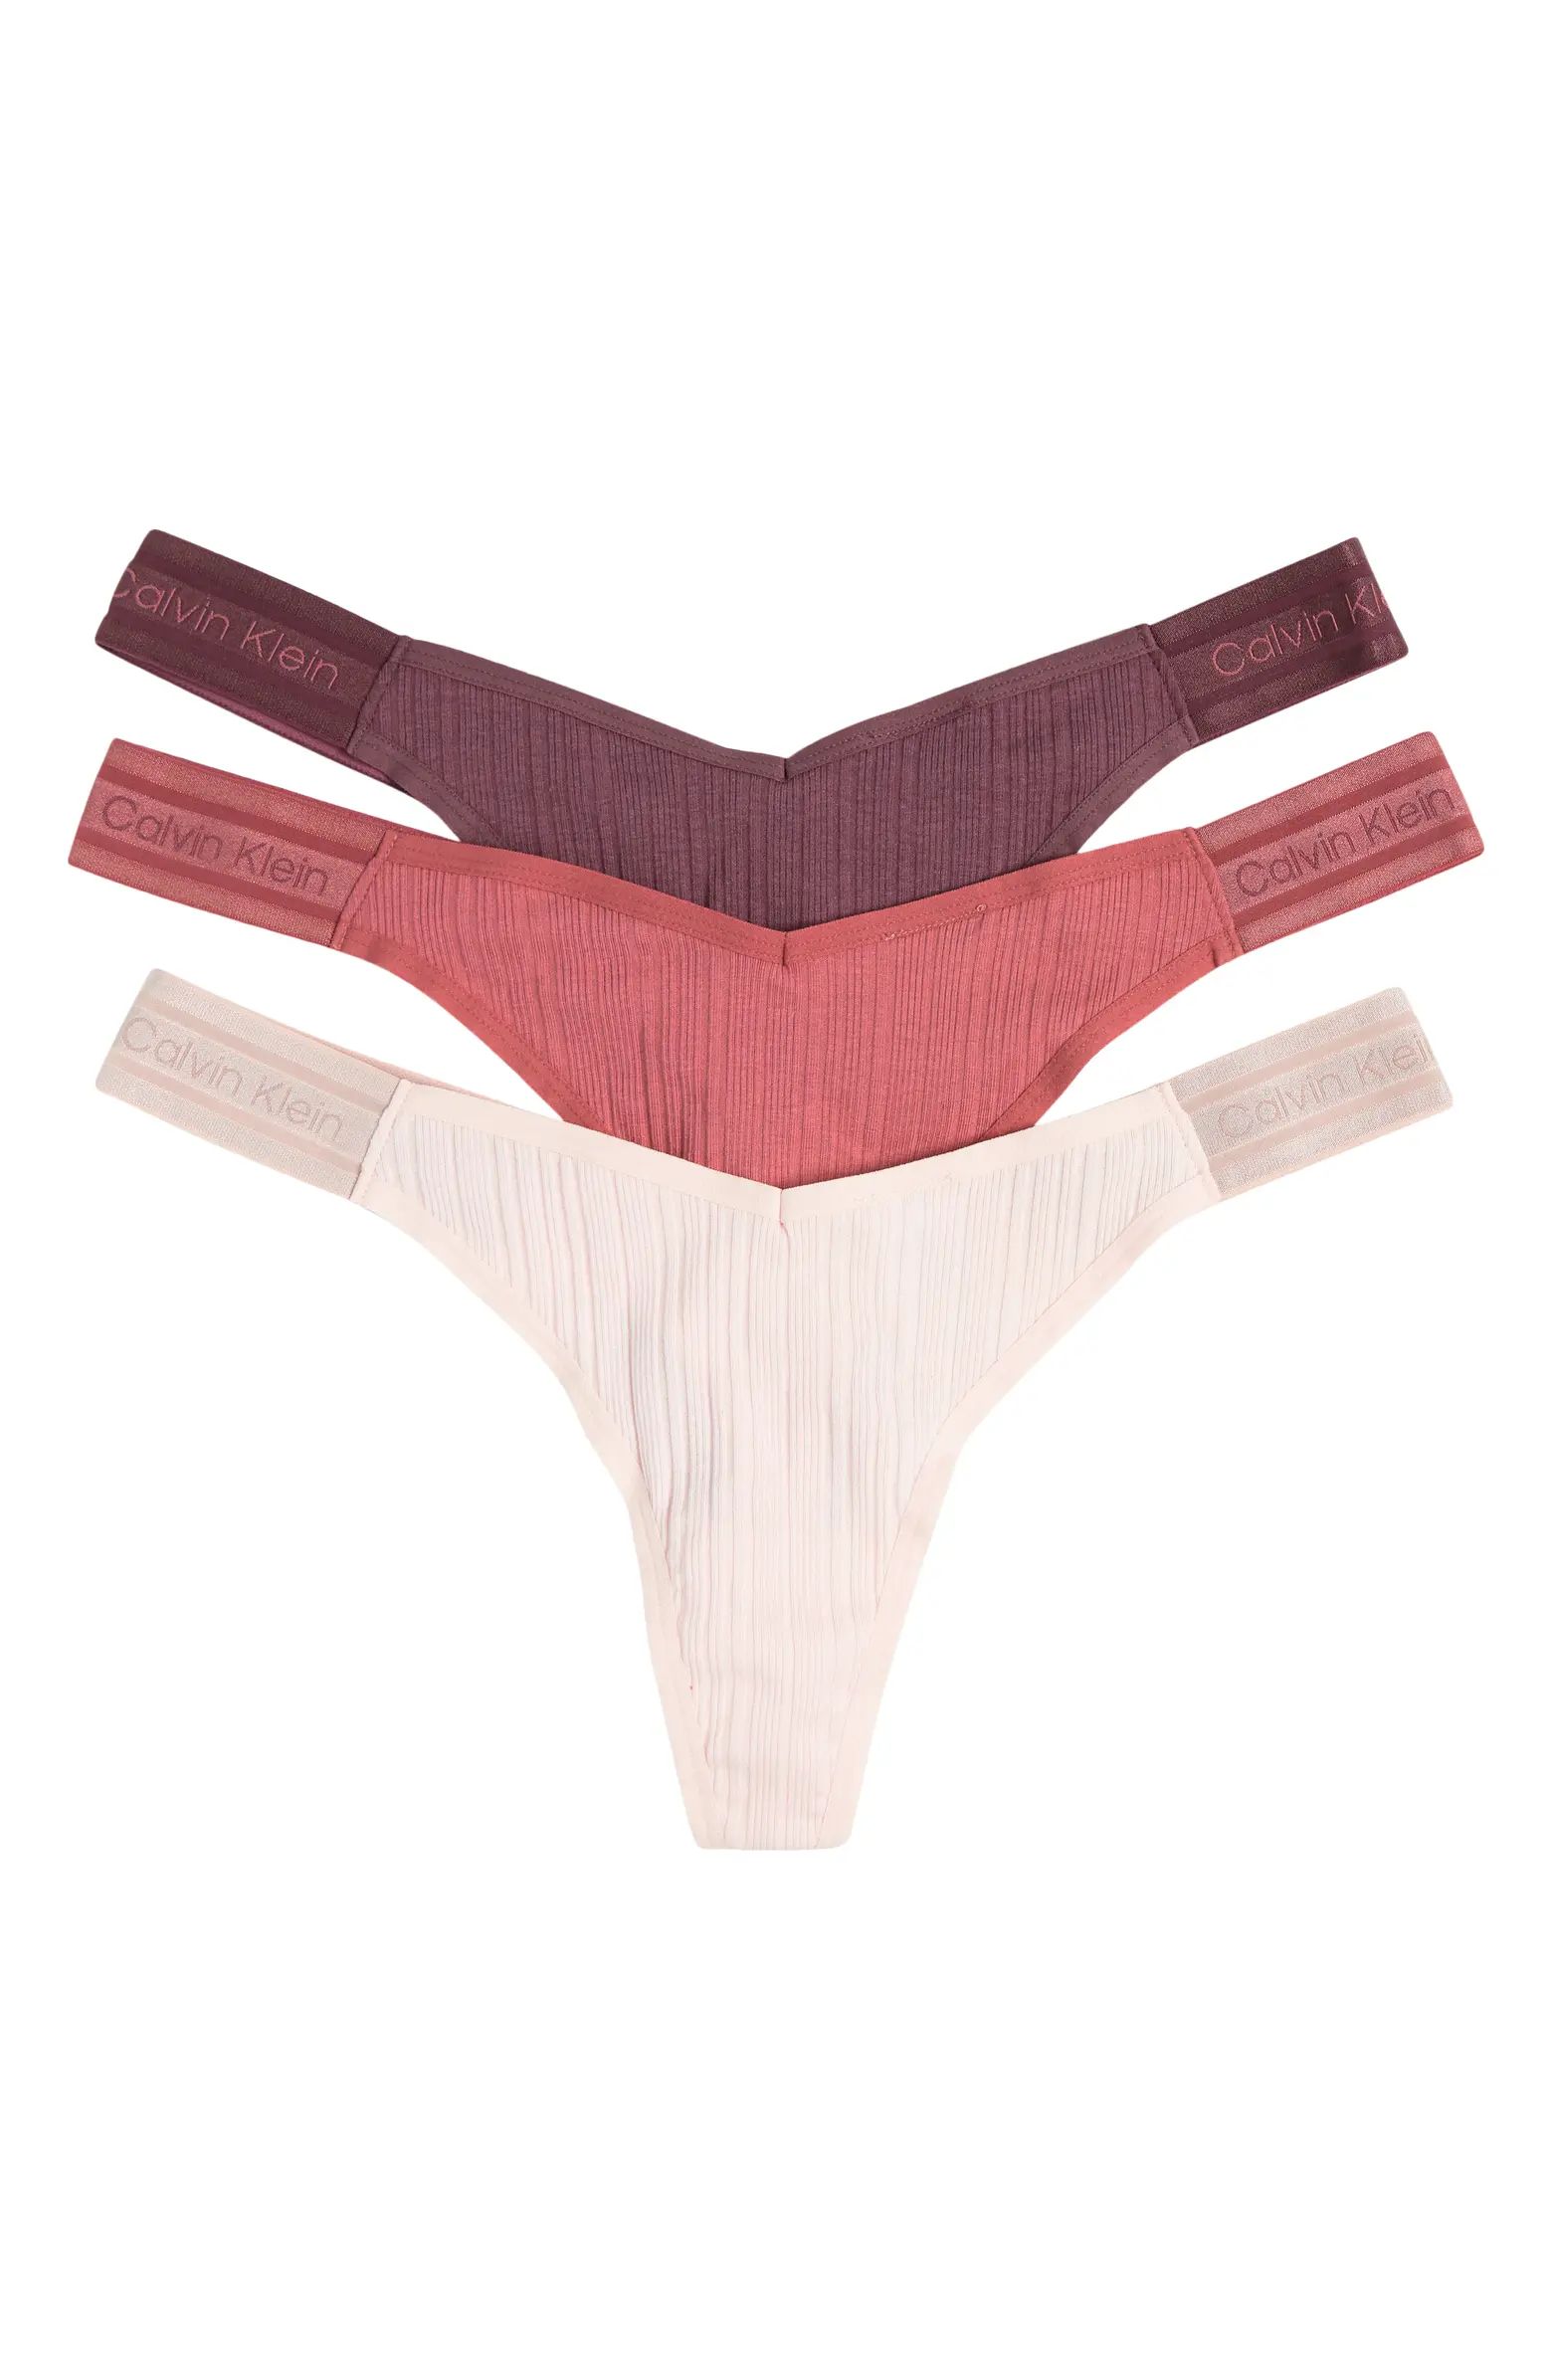 Refined Ribbed Thongs - Pack of 3 | Nordstrom Rack